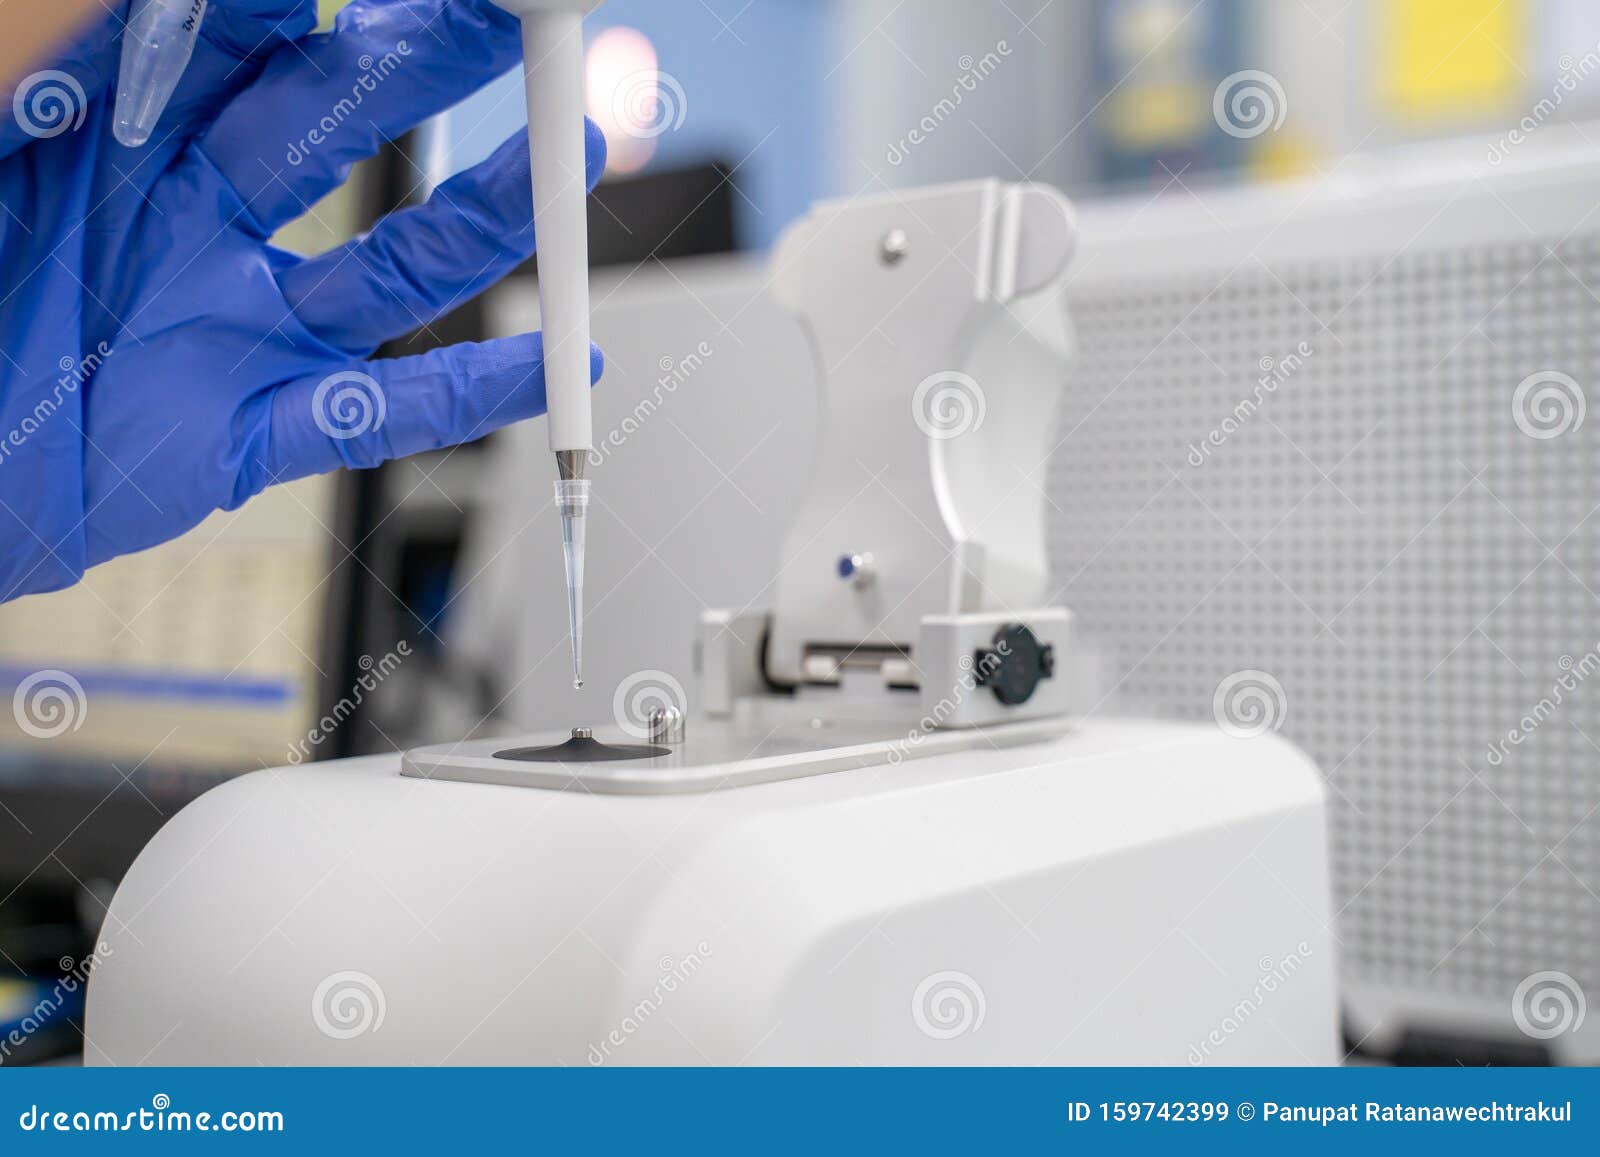 the researcher drops 2 micro-liters of the sample on pedestal to measures the rna concentration and quality using the nano drop